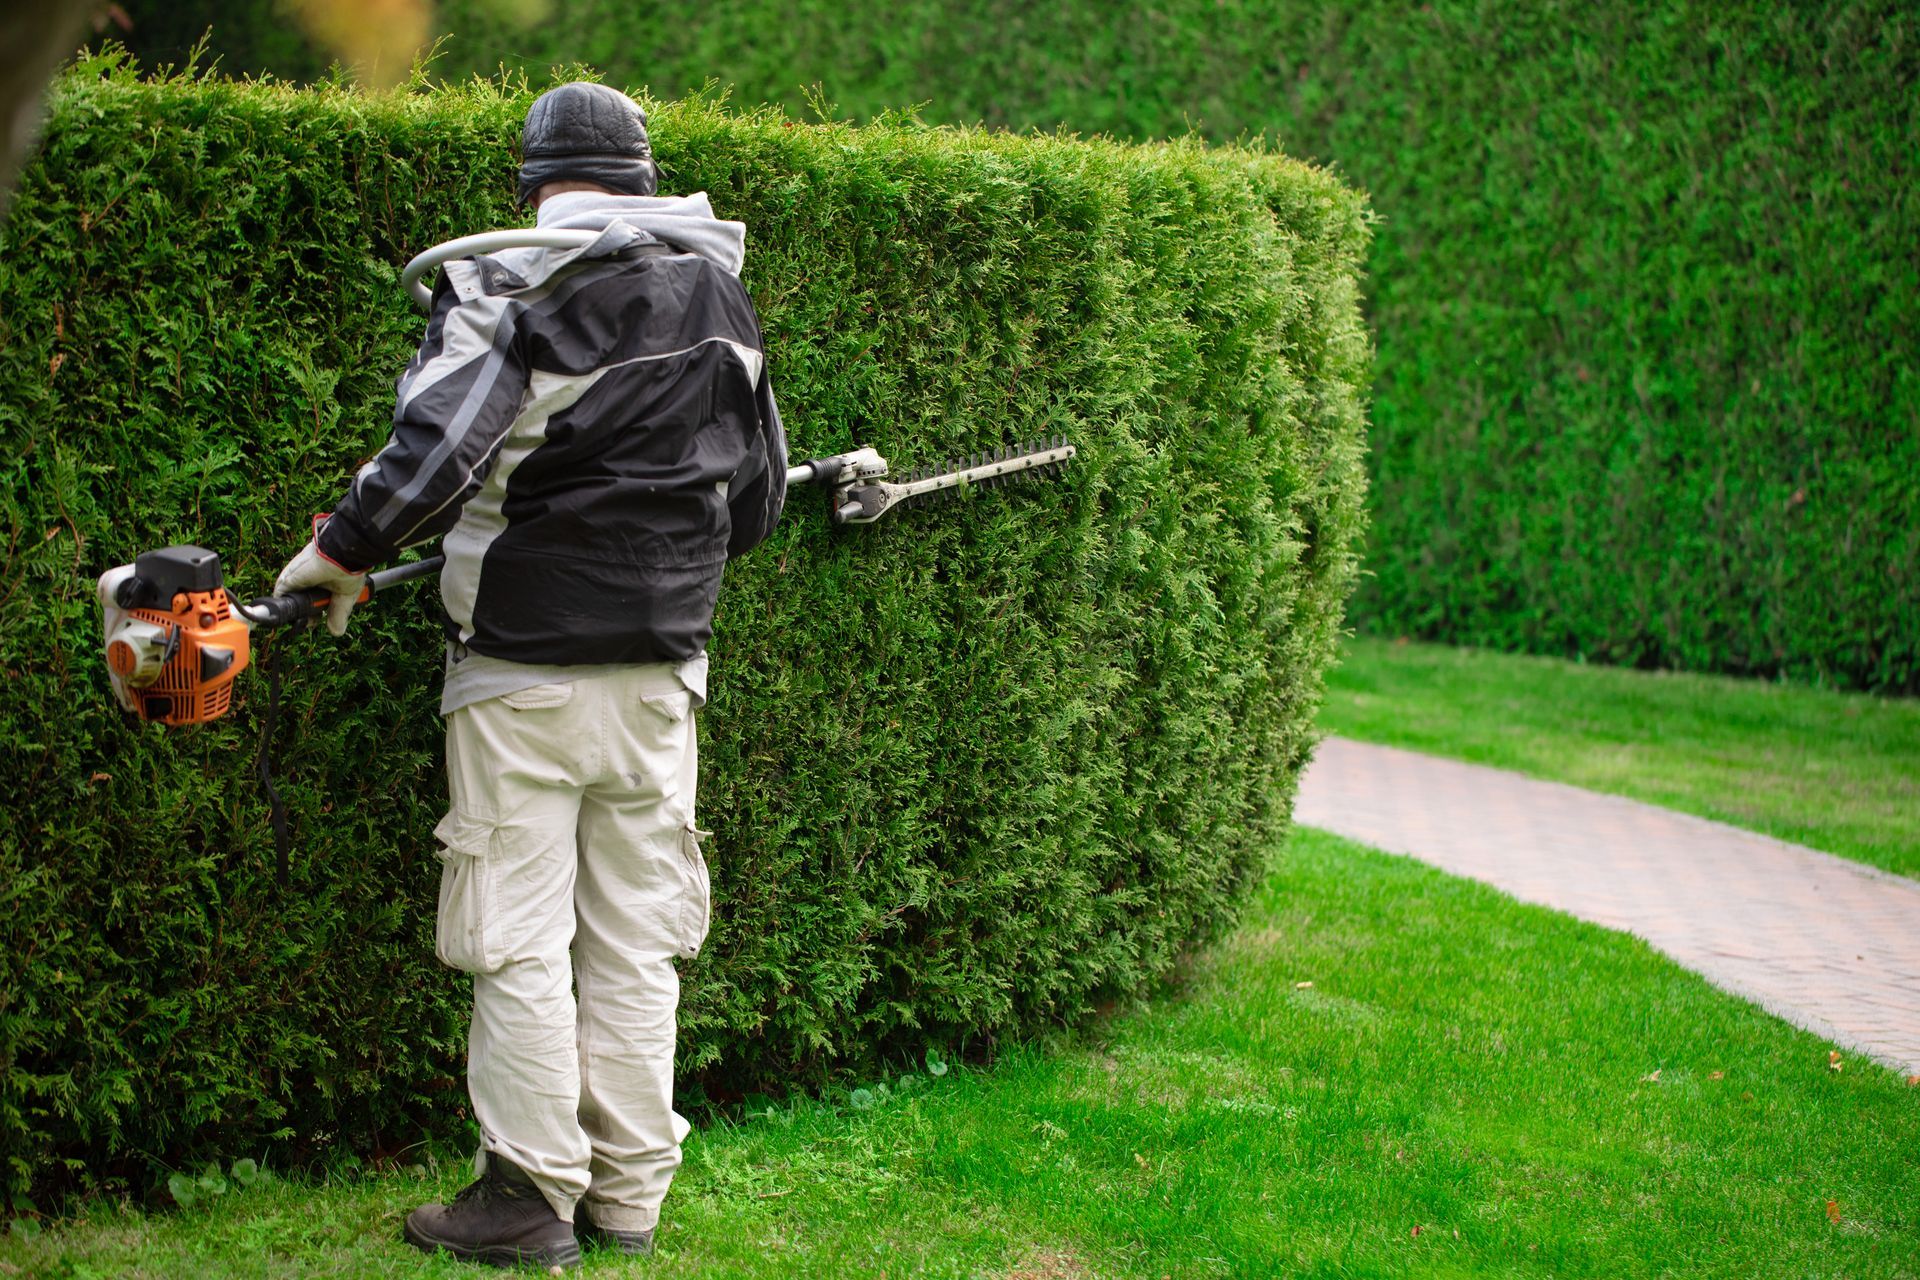 a man is trimming a hedge with a hedge trimmer .